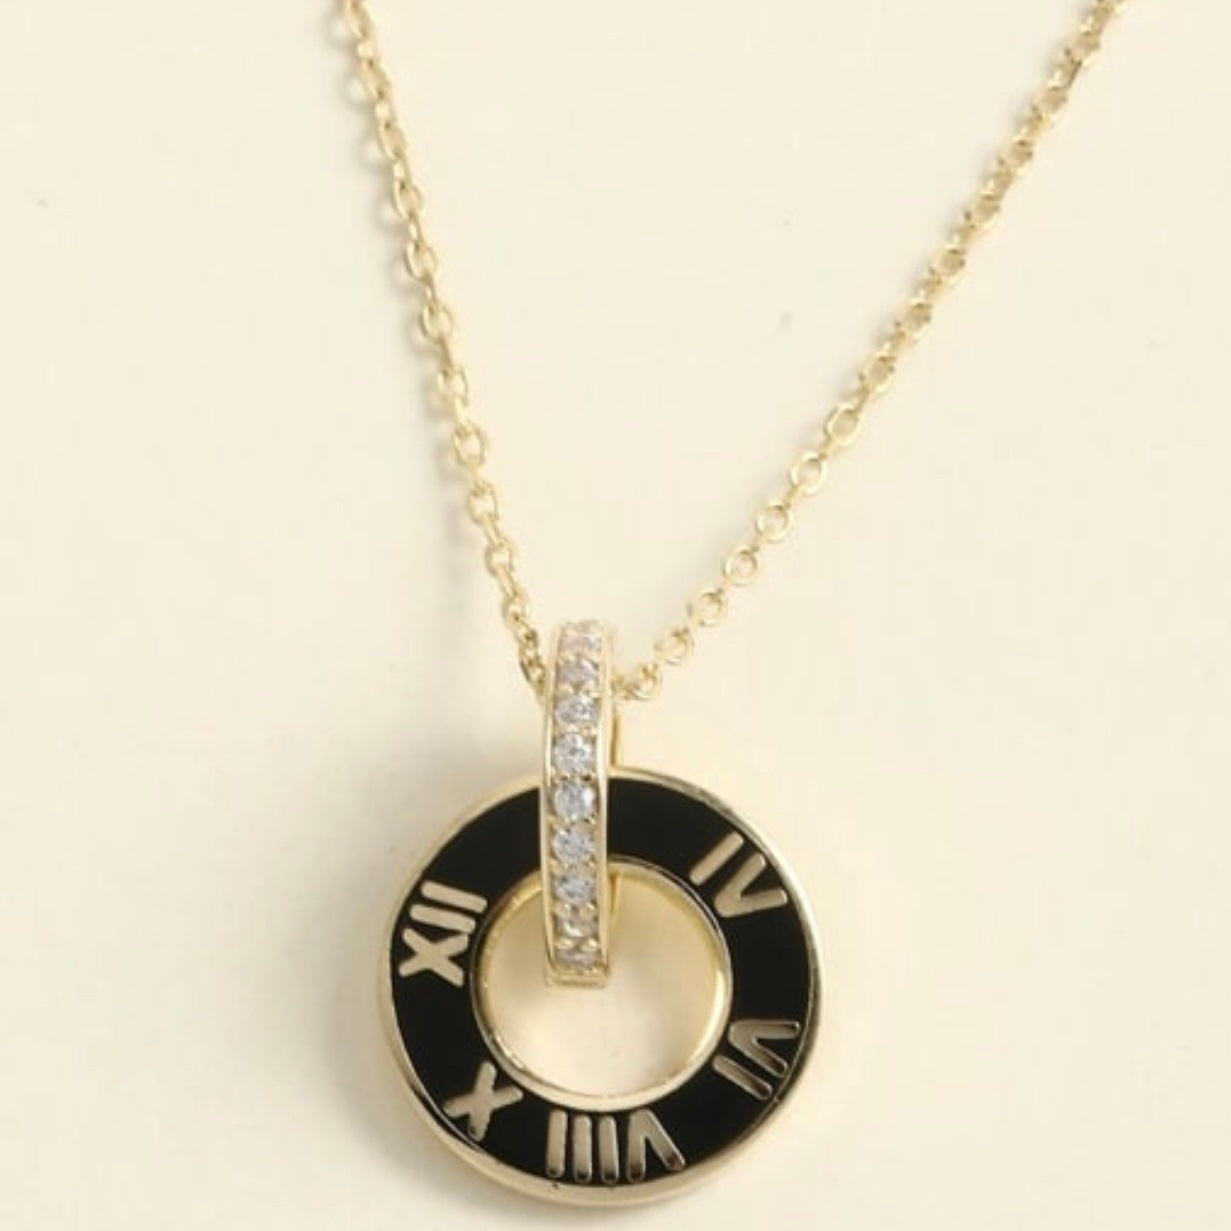 VIDA ROMAN NUMERAL LAVALIER STERLING SILVER WITH CUBIC ZIRCONIA PENDENT NECKLACE